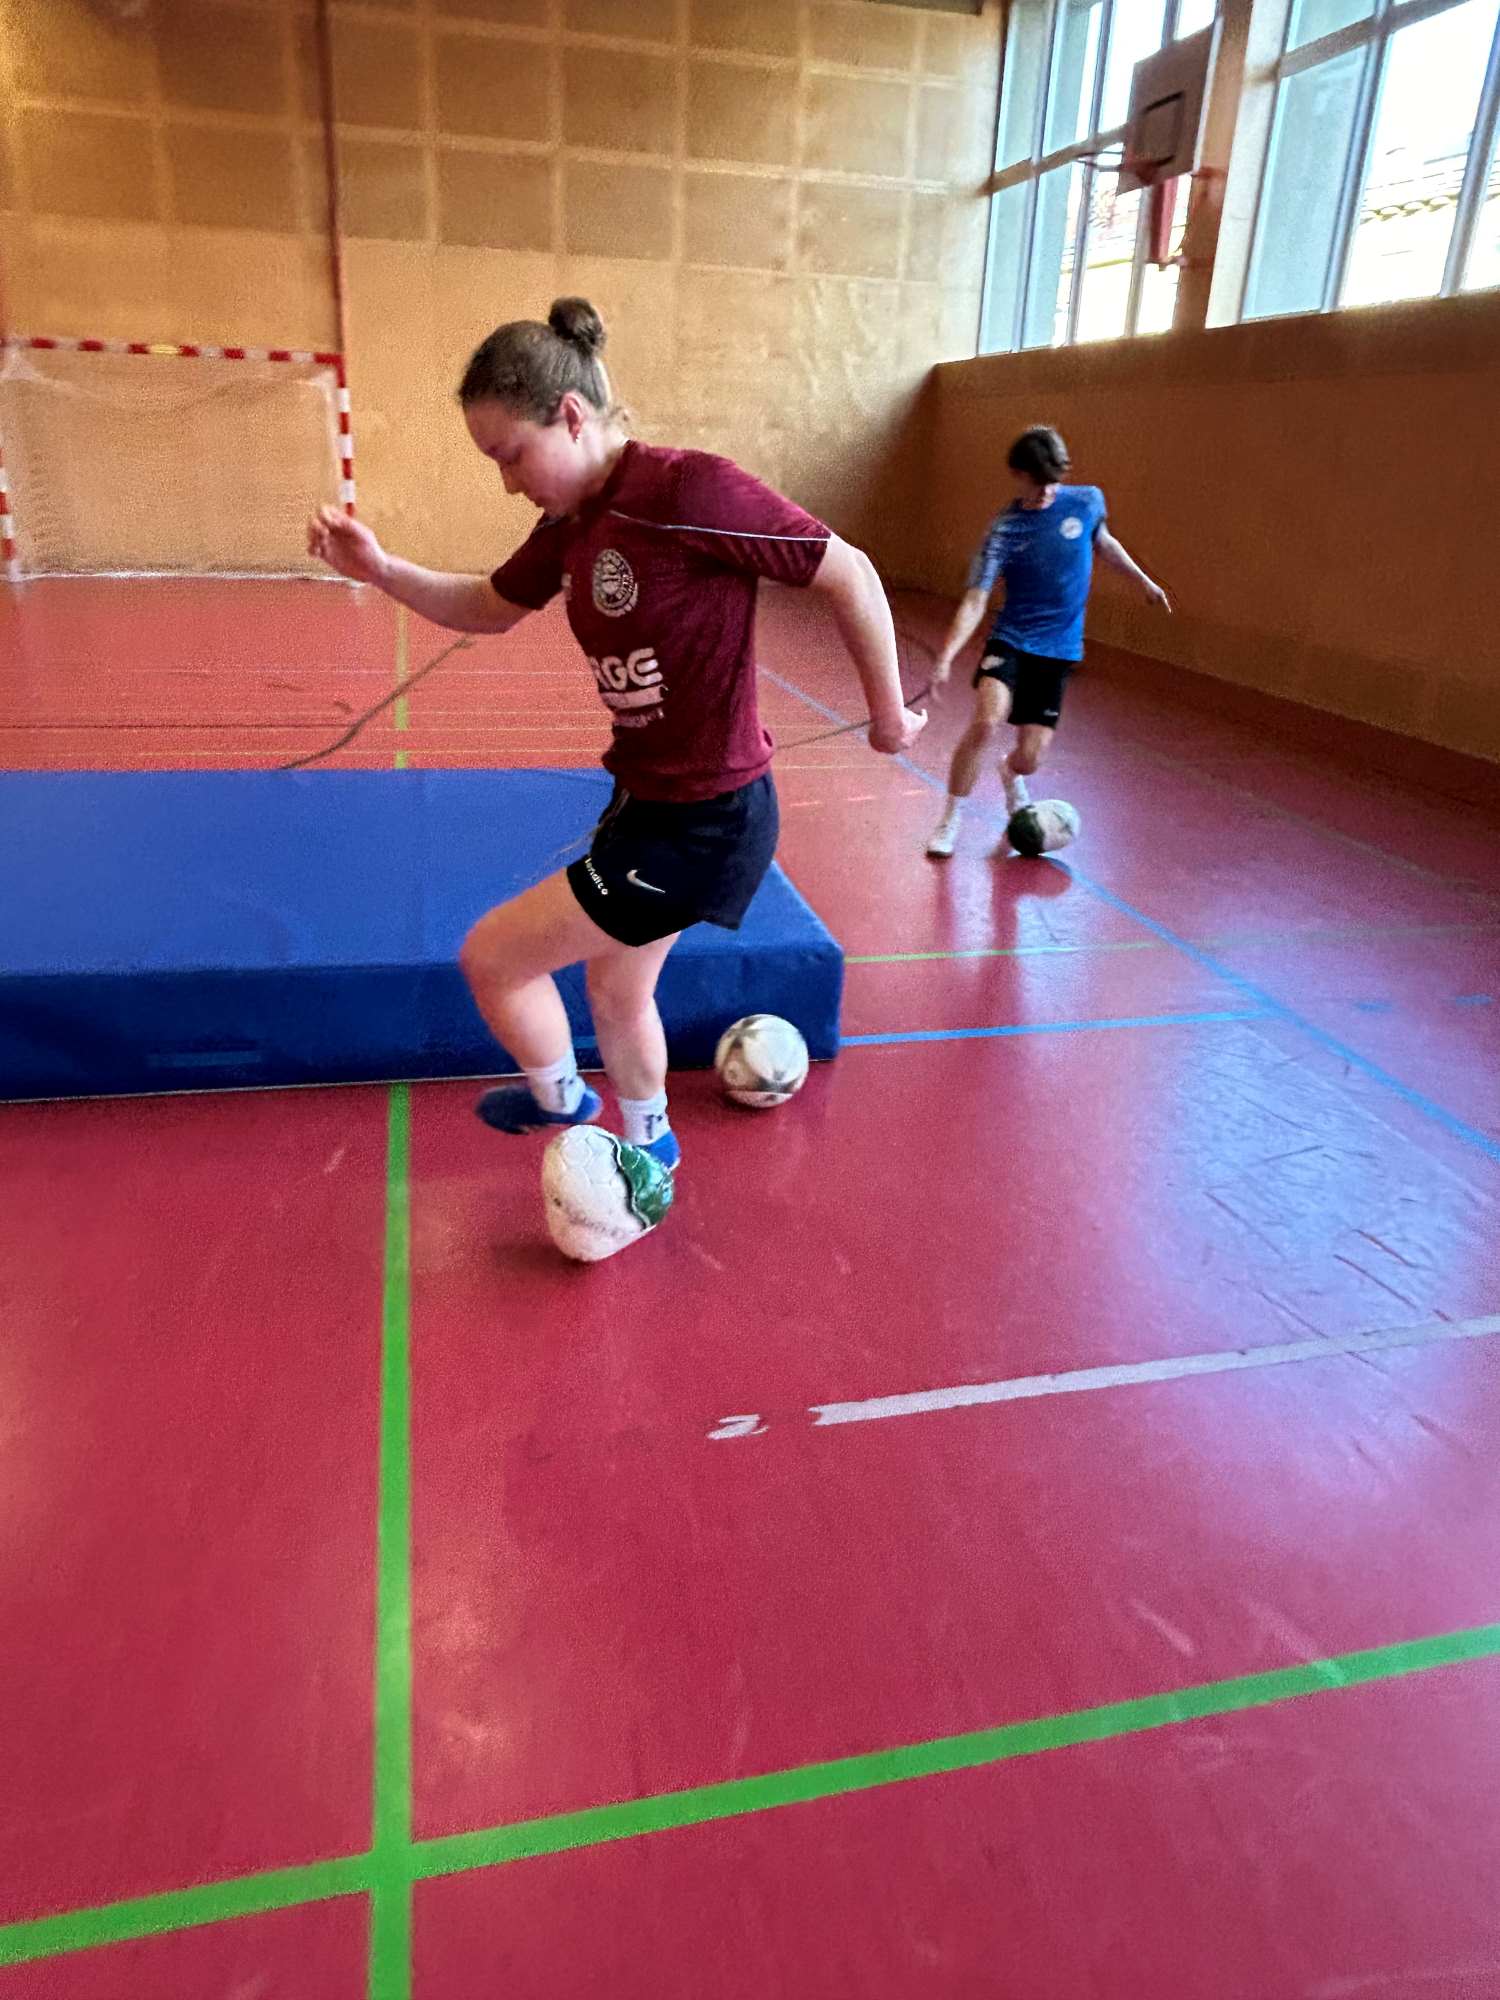 AFS Individualtraining - Training in der Halle mit Ball - Dribbling